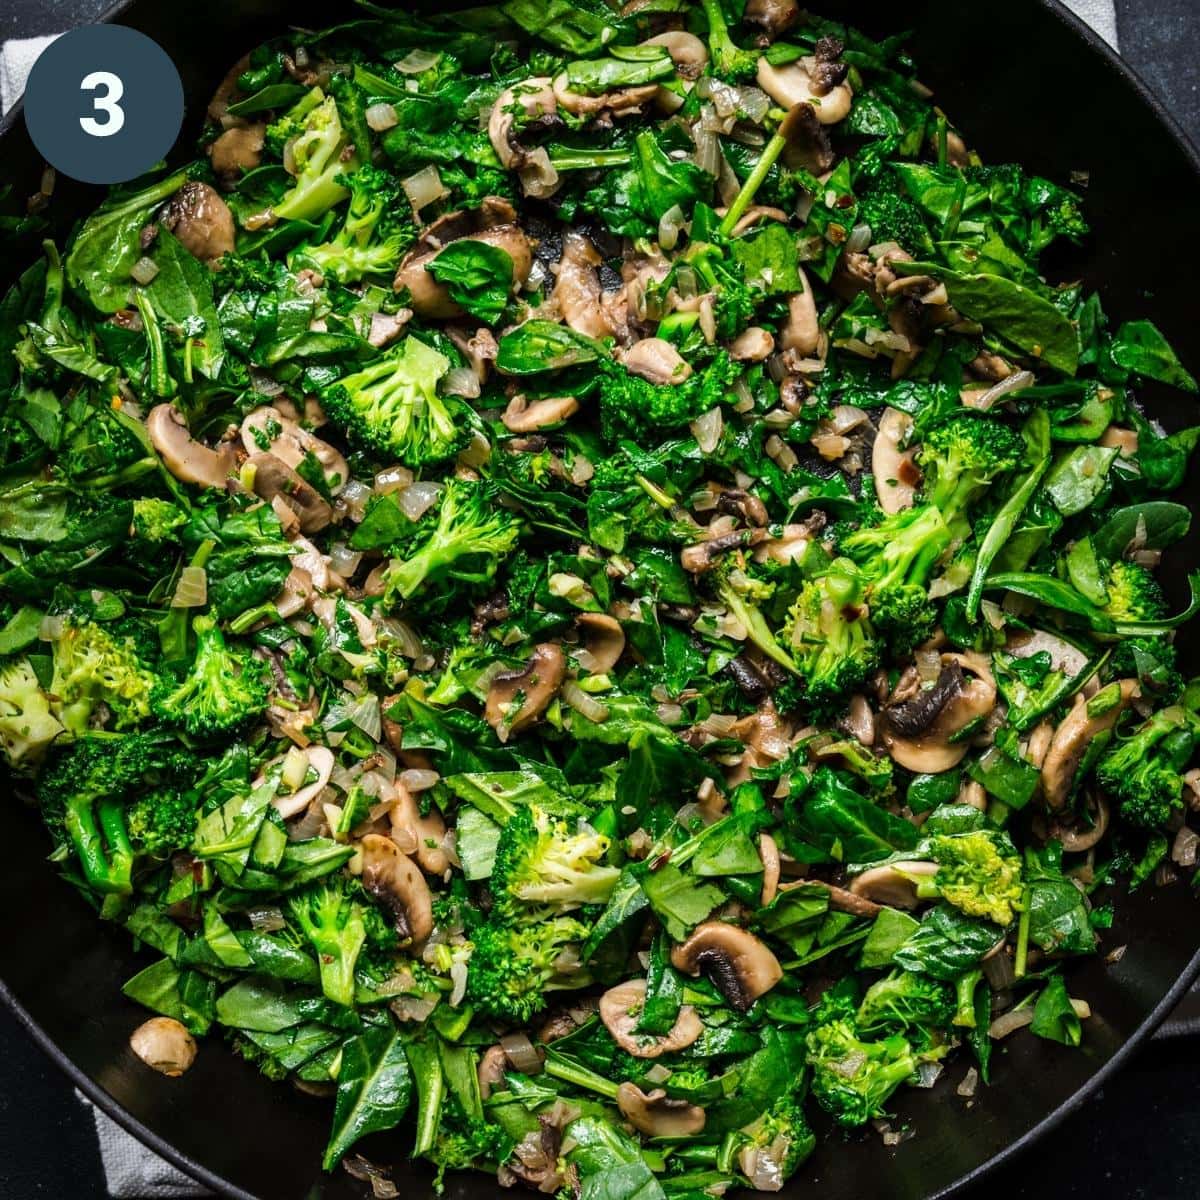 Sautéed mushrooms, spinach and broccoli in pan. 